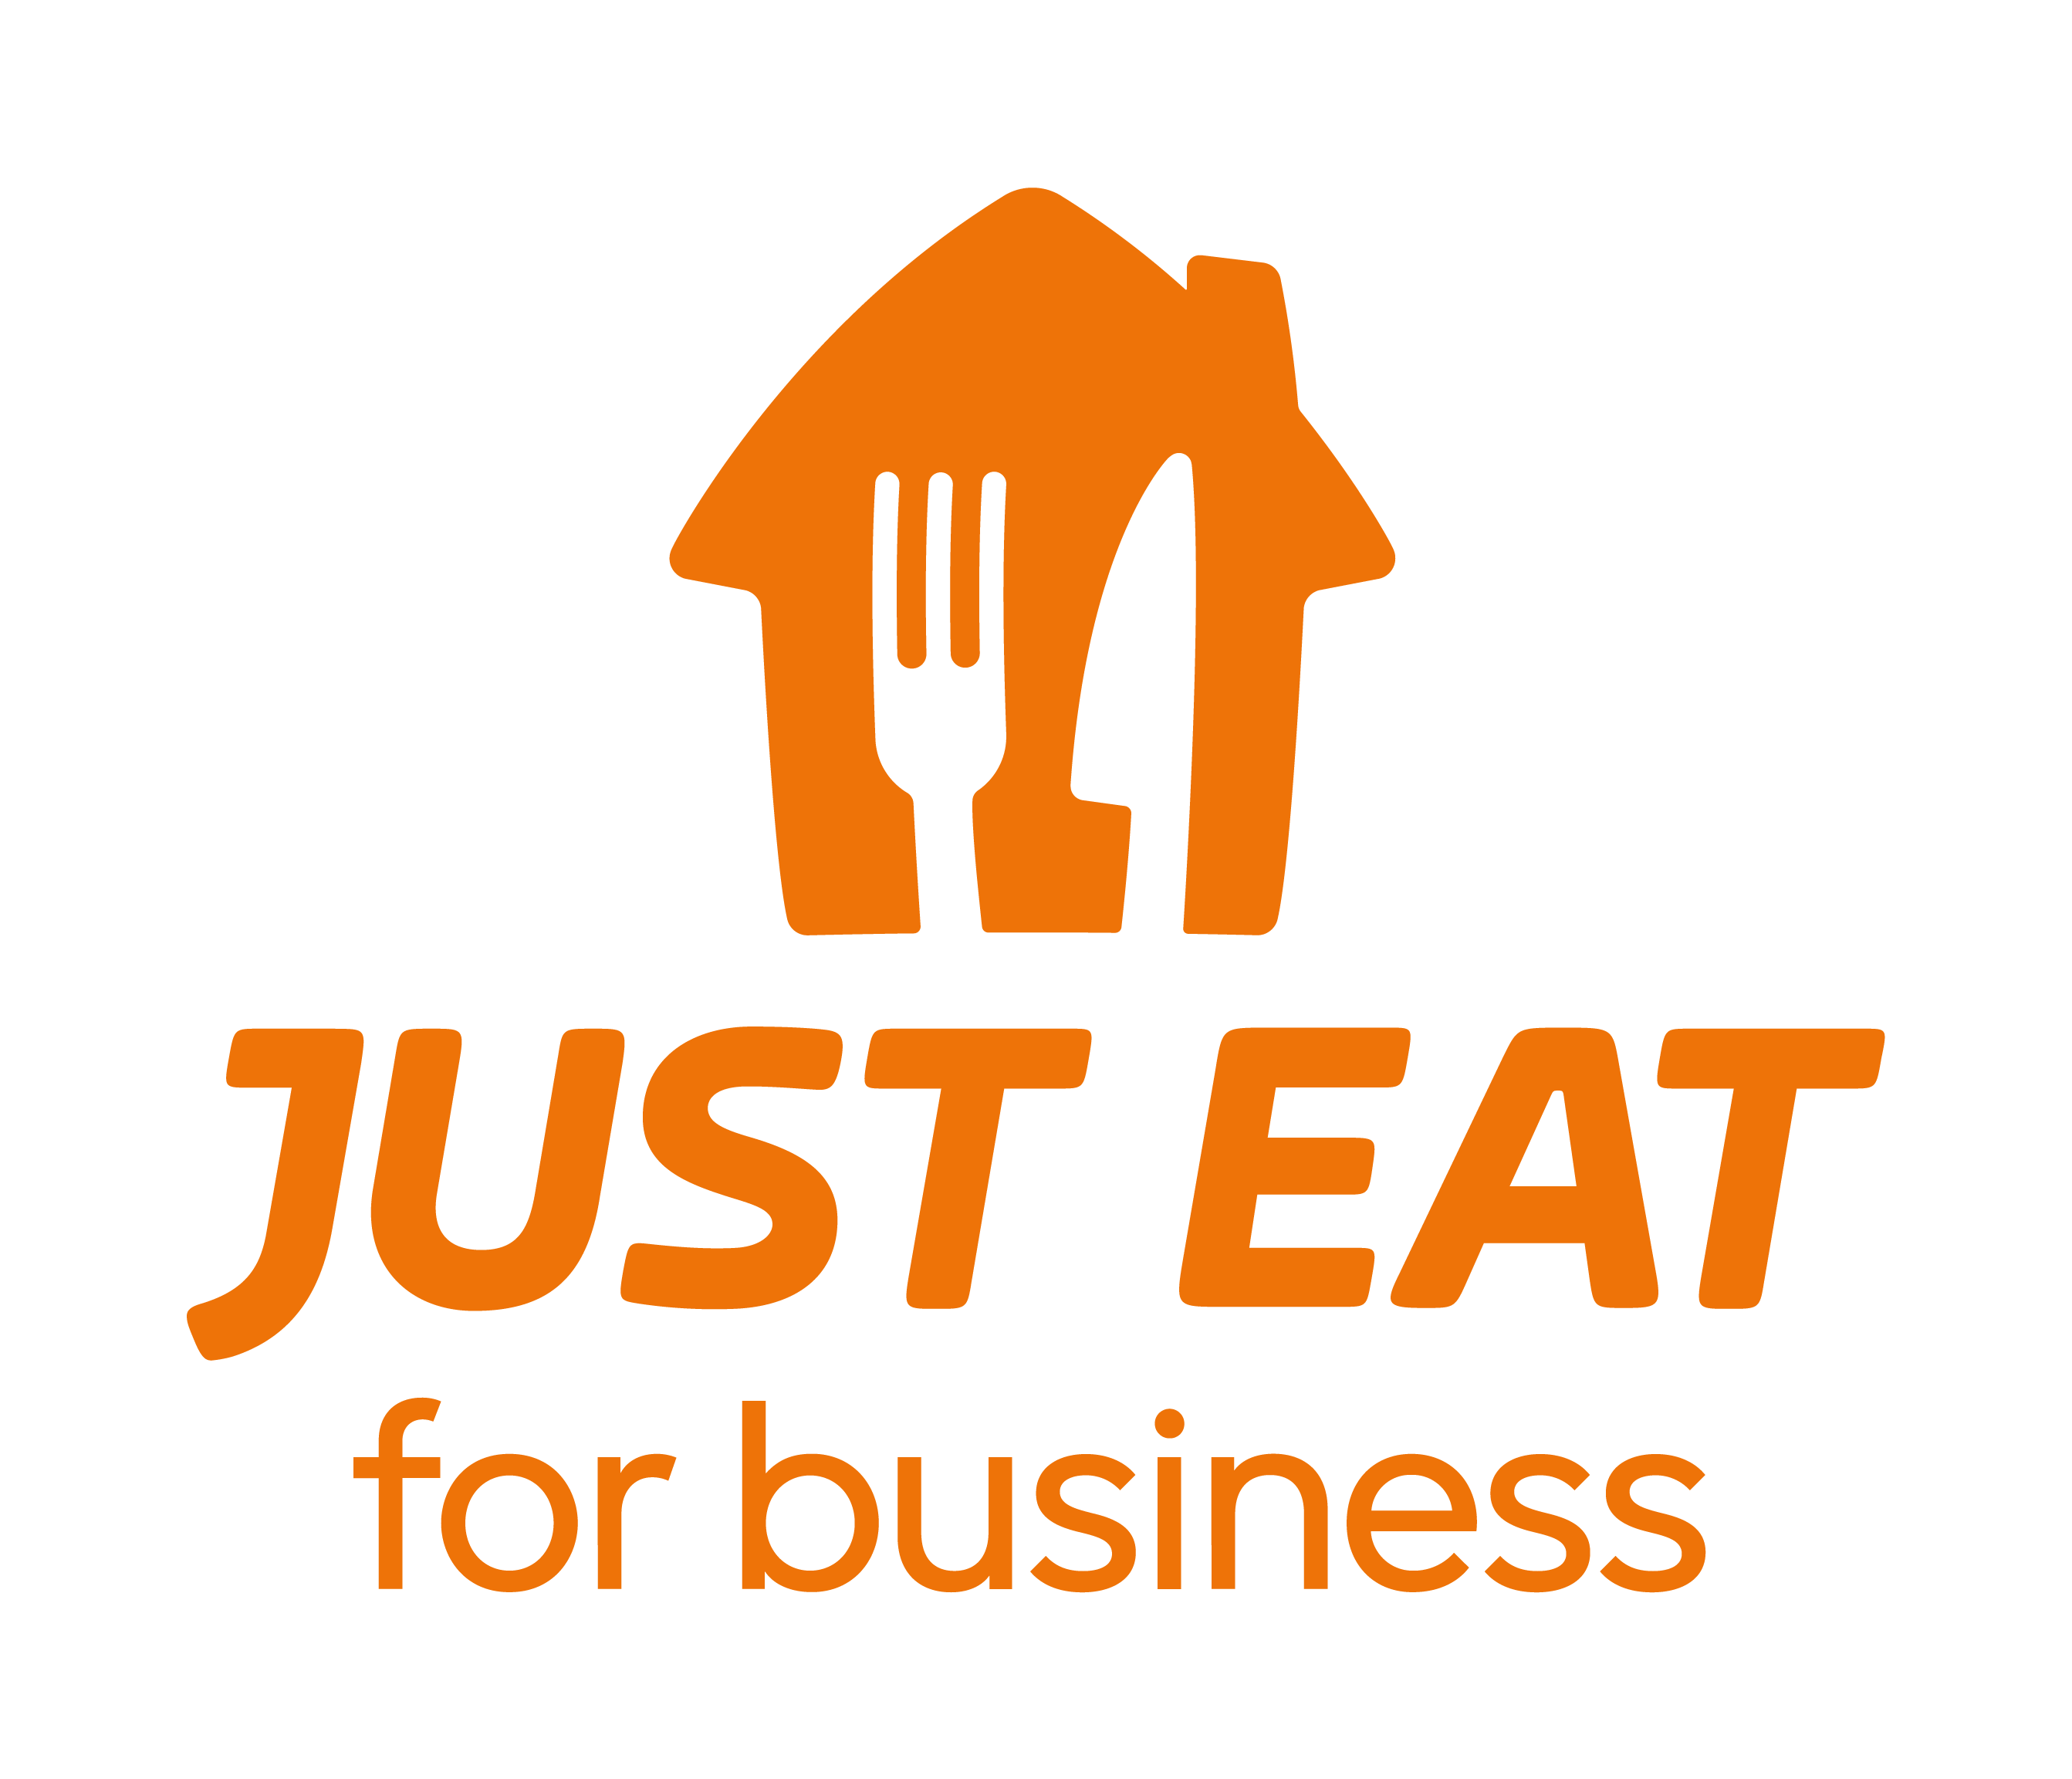 Just Eat for Business 